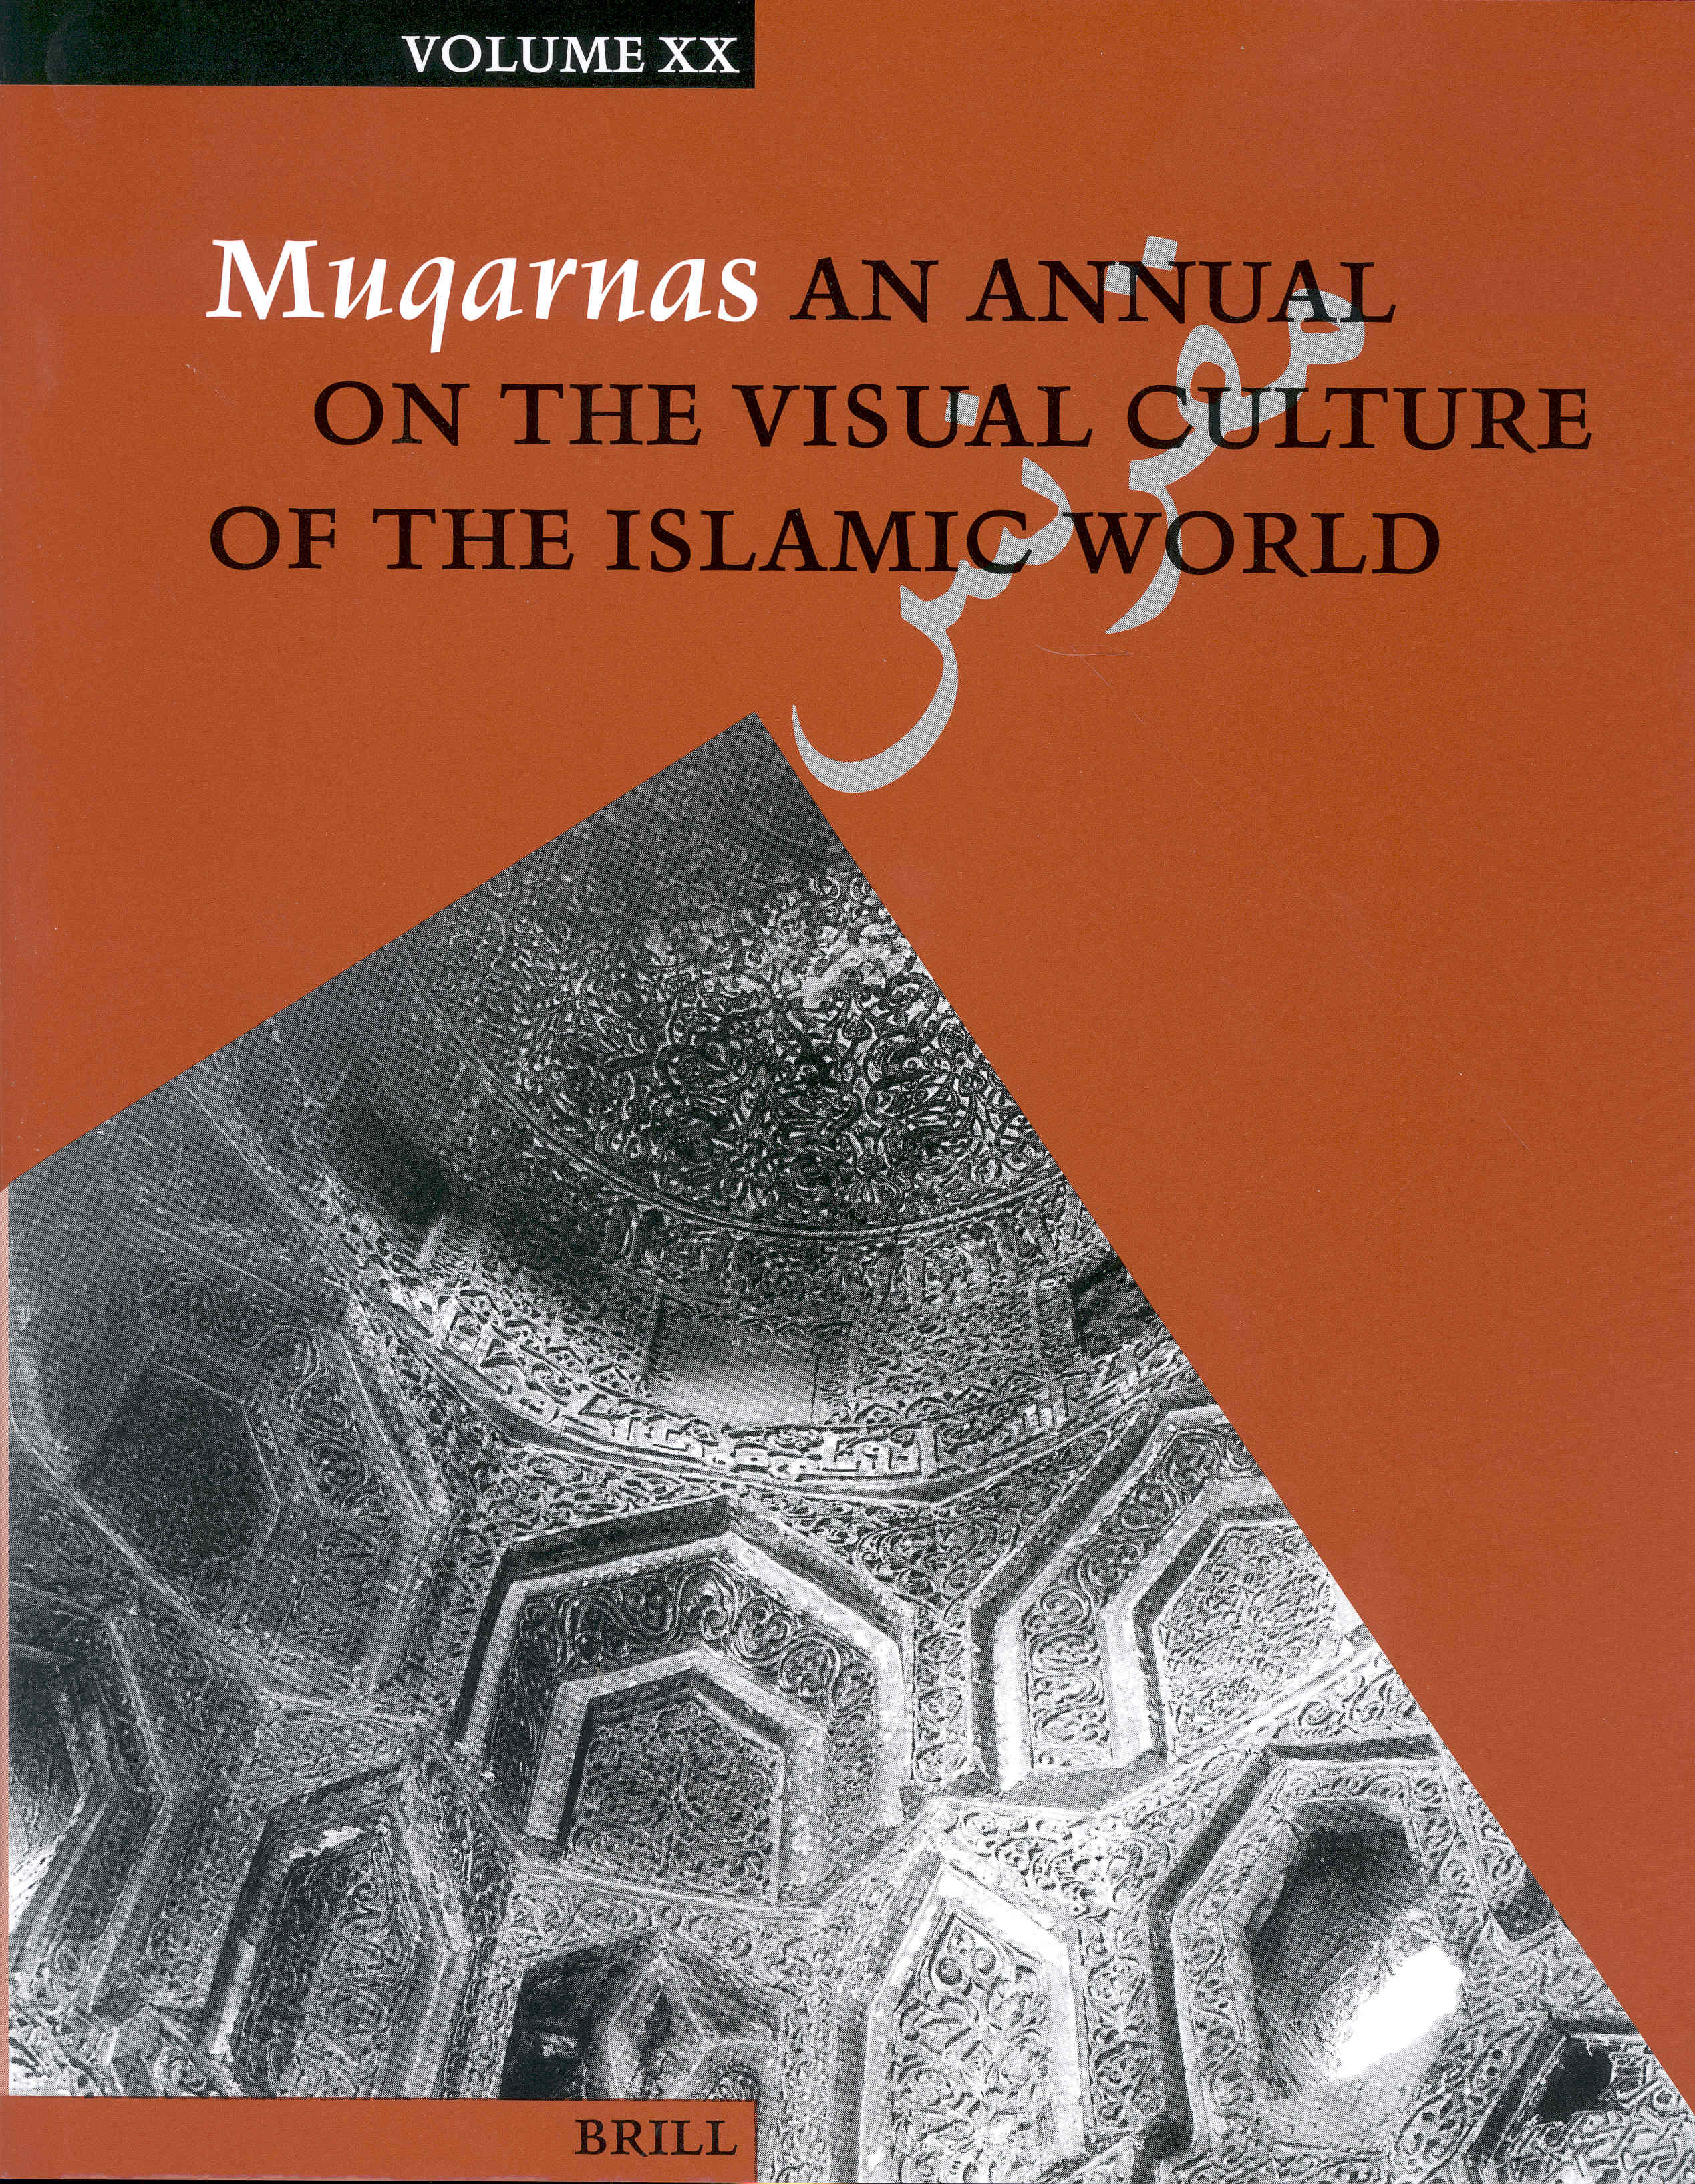 Karen Leal - <p>The Aga Khan Program at Harvard University publishes scholarly works on the history of Islamic art and architecture. Established in 1983,&nbsp;<em>Muqarnas: An Annual on the Visual Cultures of the Islamic World</em>,&nbsp;devoted primarily to the history of Islamic art and architecture, is a lively forum for discussion among scholars and students in the West and in the Islamic world. Subjects to be covered in its pages will include the whole sweep of Islamic art and architectural history up to present time, with attention devoted as well to aspects of Islamic culture, history, and learning.</p>